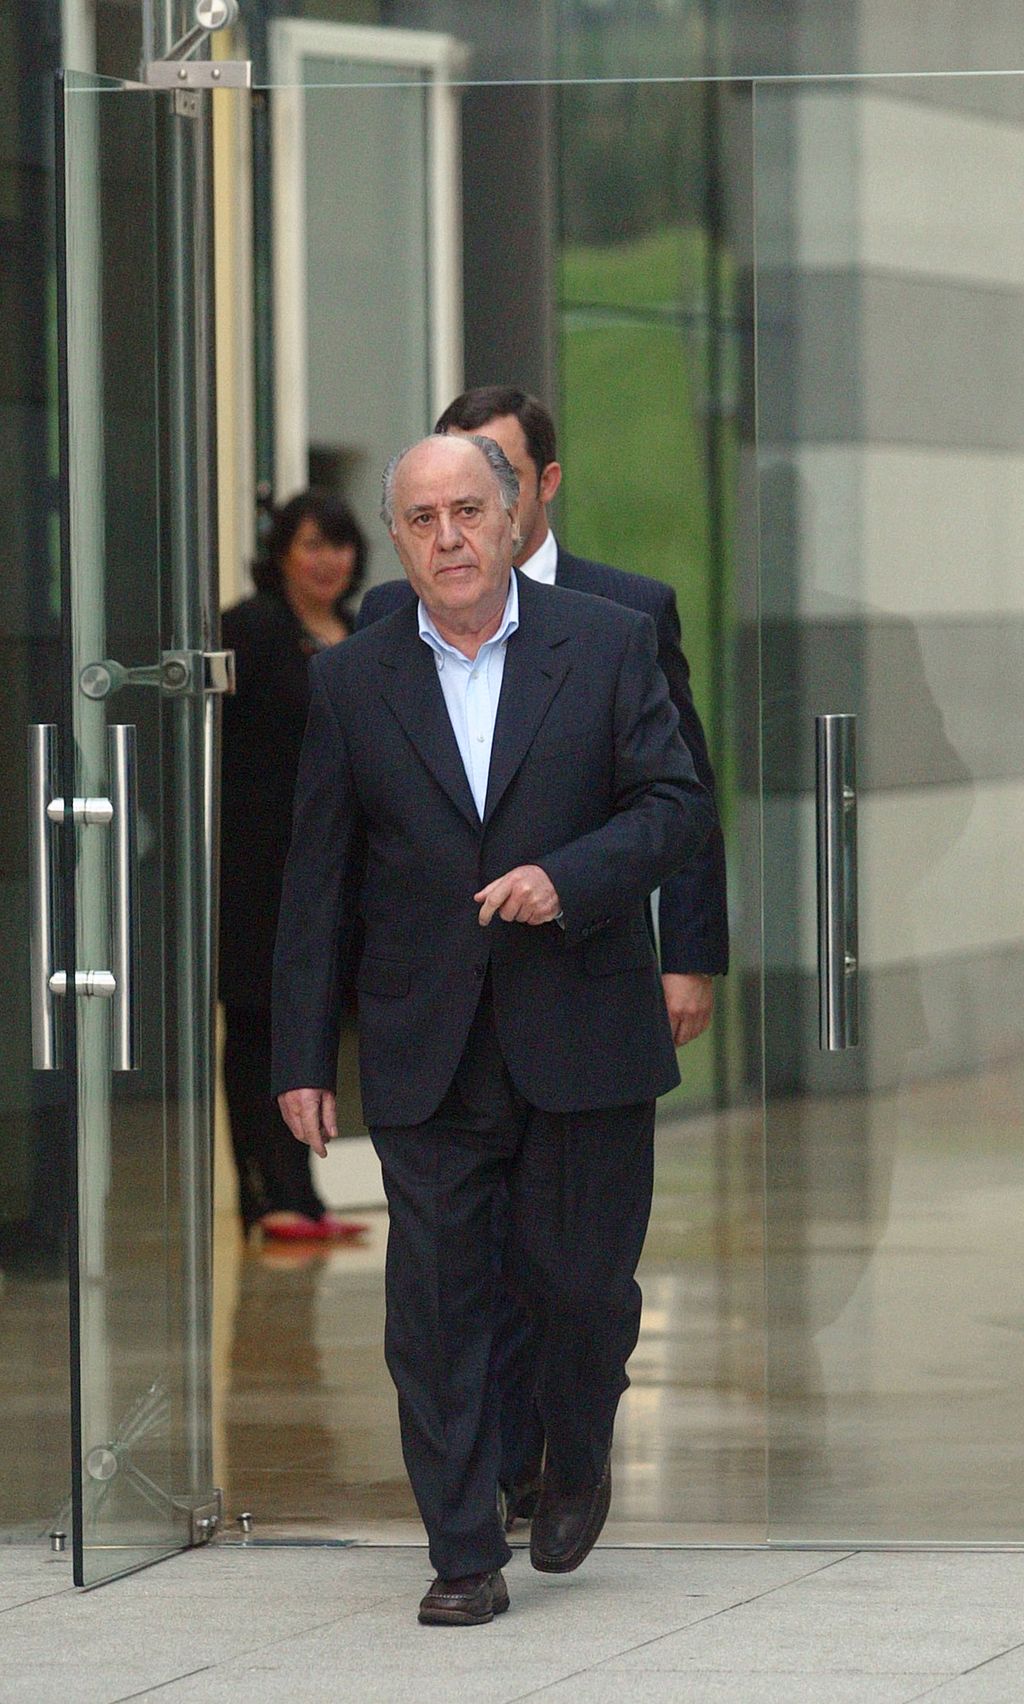 Amancio Ortega, general manager of Spanish textil company Zara, goes out to welcome Uruguayan President Jorge Batlle, in Arteixo, near Coruna, northwestern Spain, 04 February 2004. Jorge Batlle is in Spain for a one-week-long official visit. (Photo by MIGUEL RIOPA / AFP)